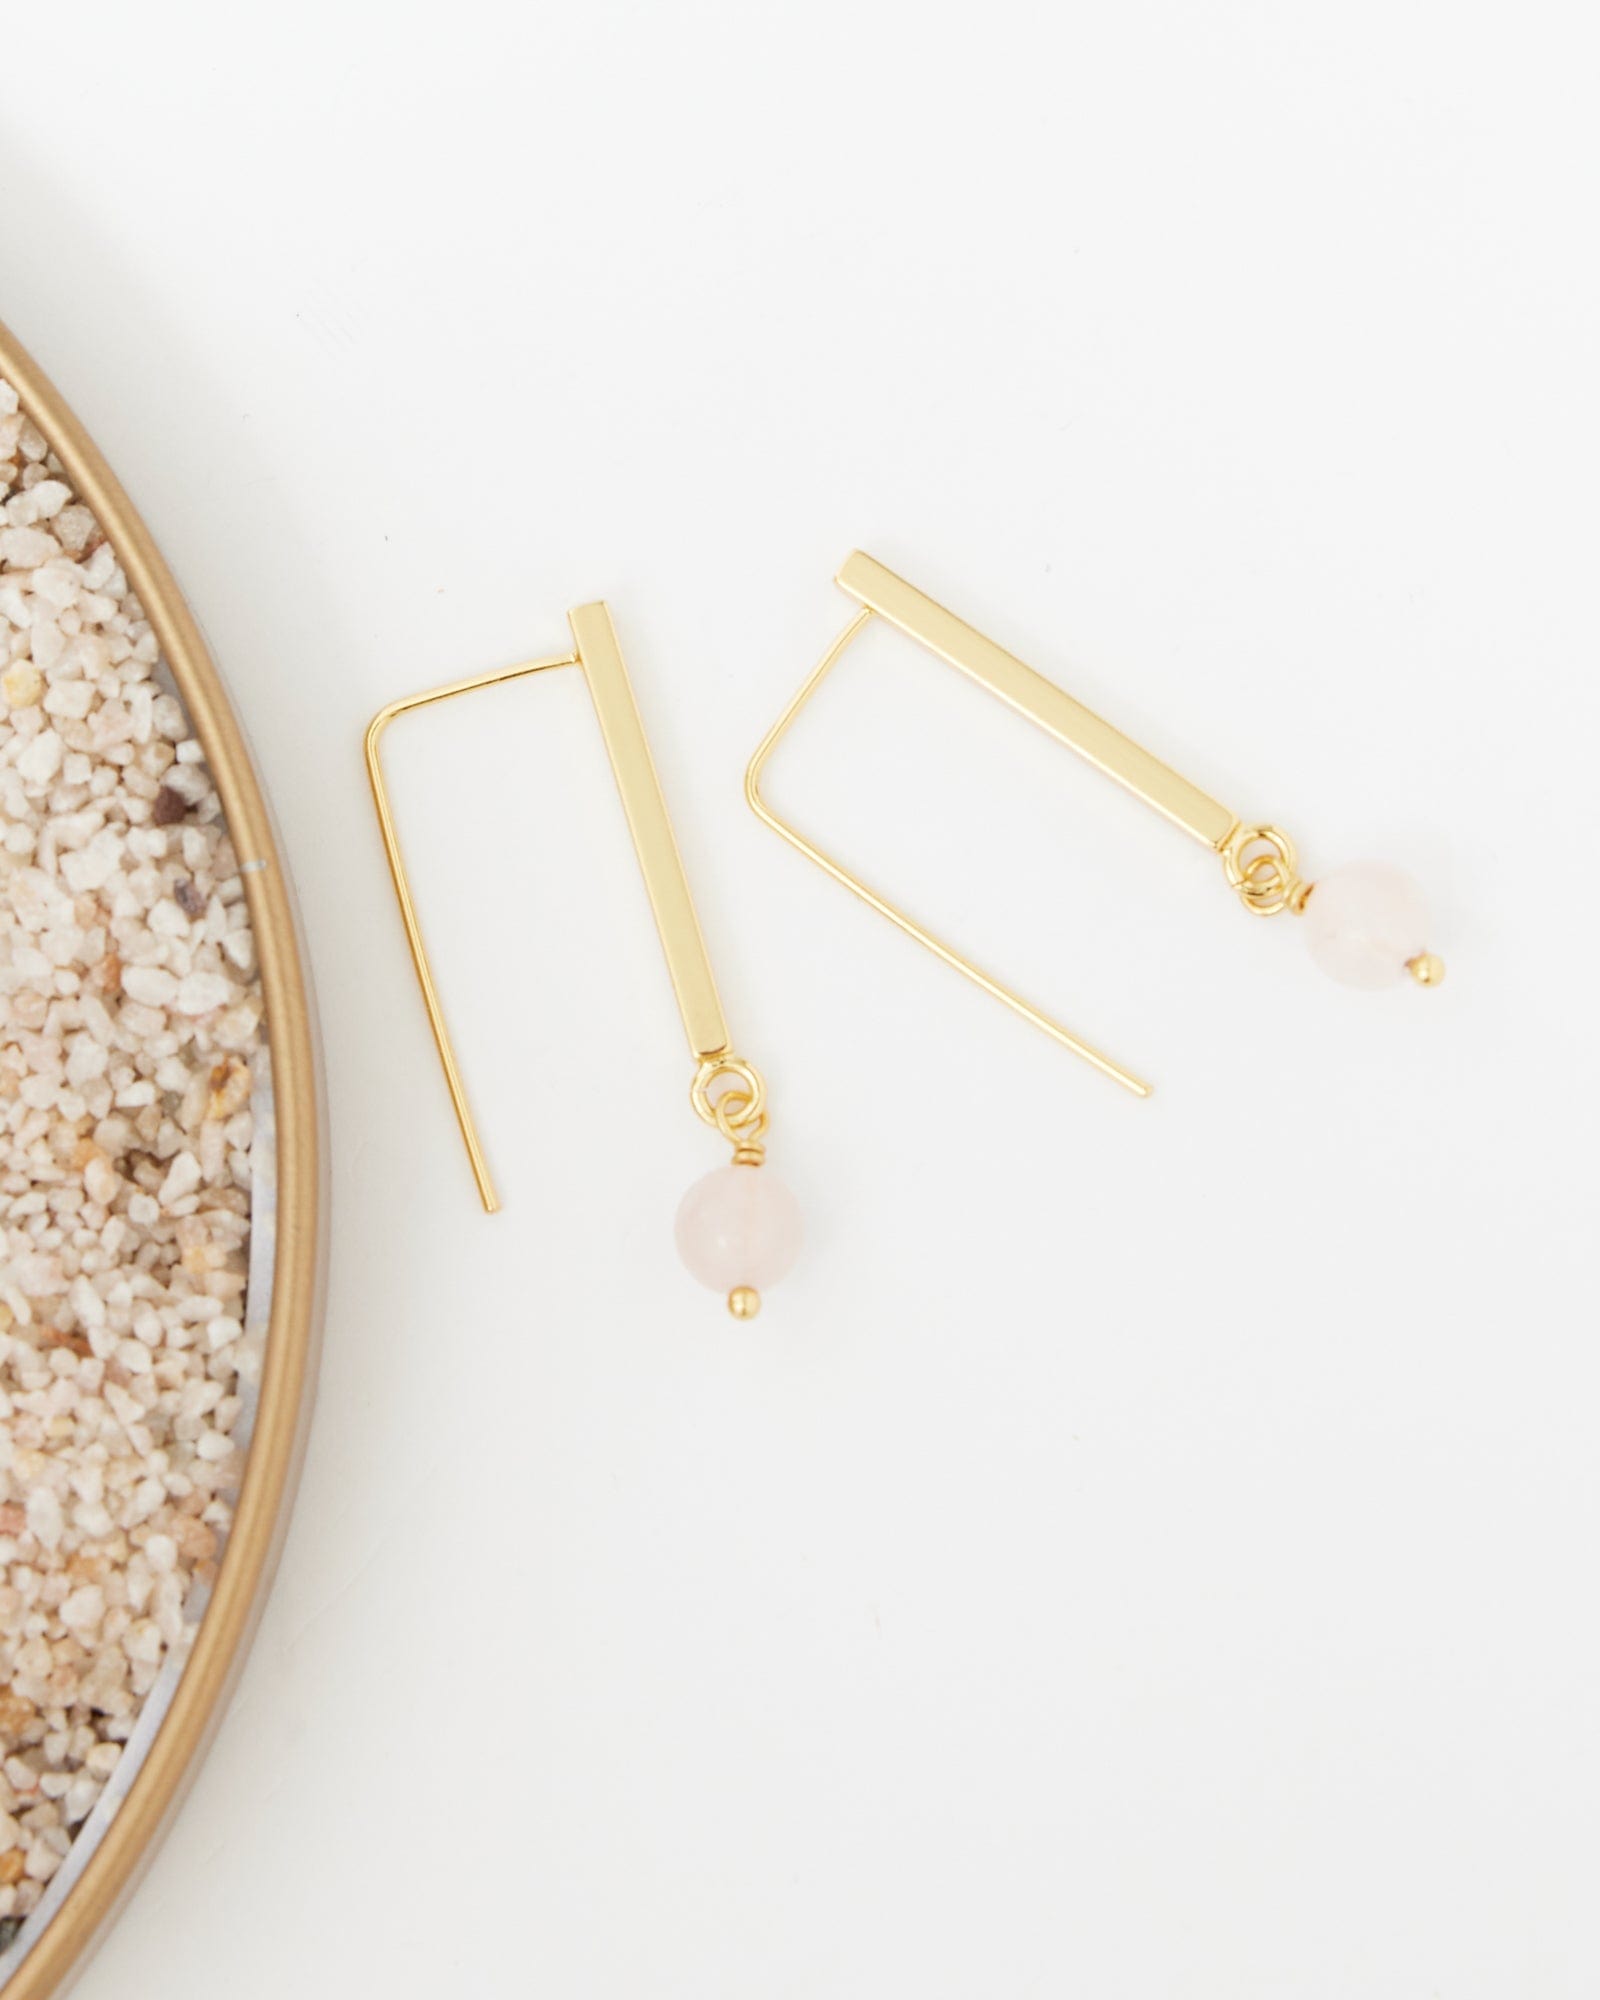 Two gold earrings with small pink bead at end